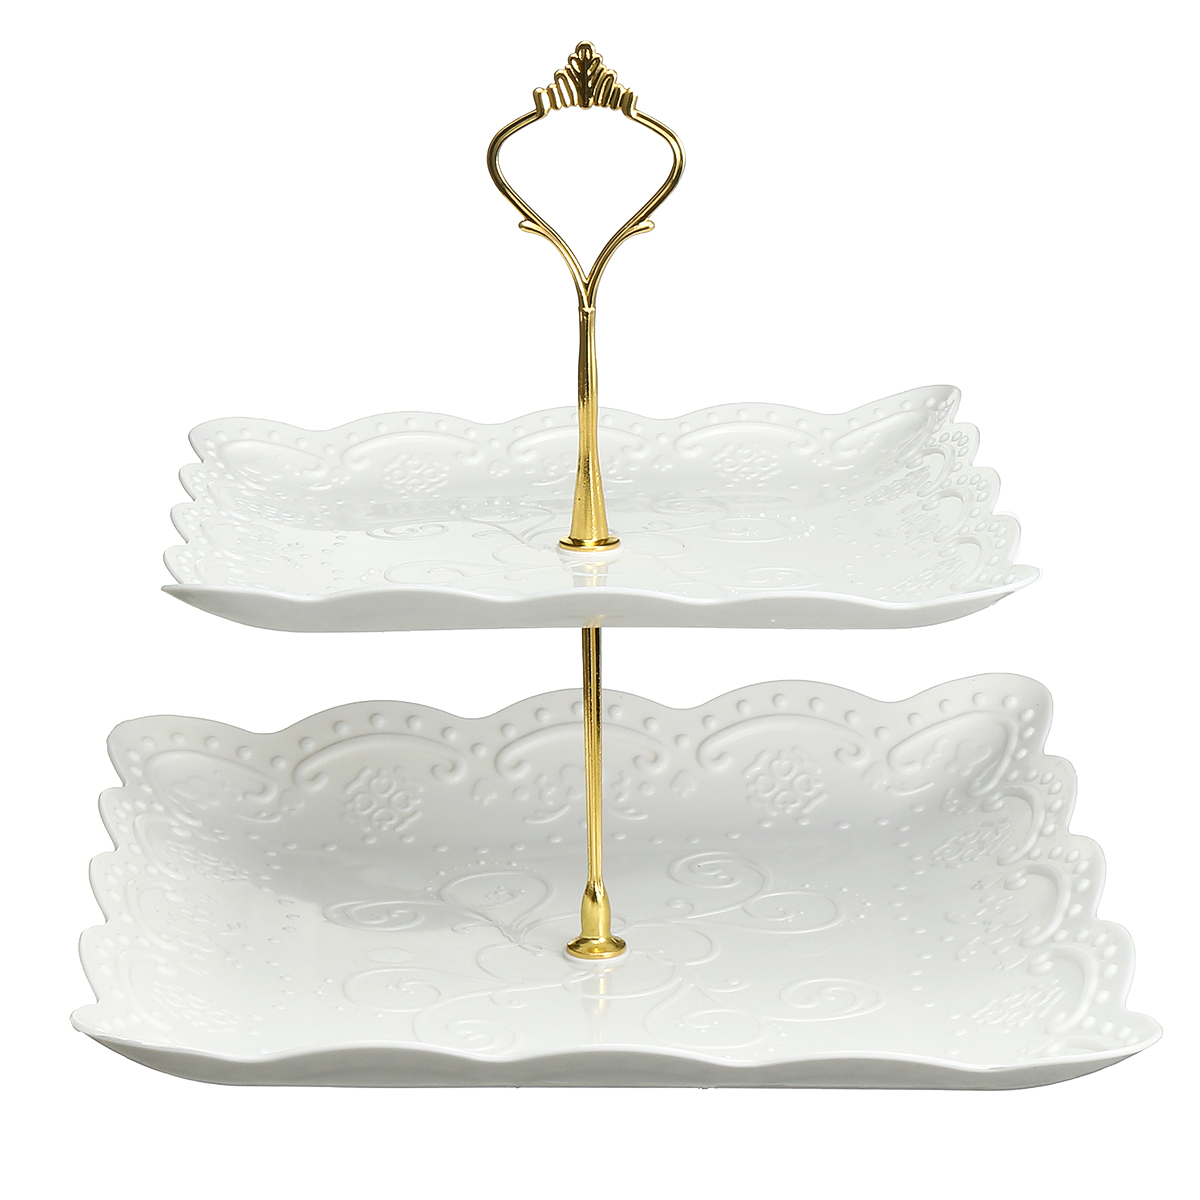 European-style-23-Tier-Fruit-Plate-Dessert-Tray-Cake-Table-Multi-layer-Cake-Stand-Cake-Setting-Table-1926348-18